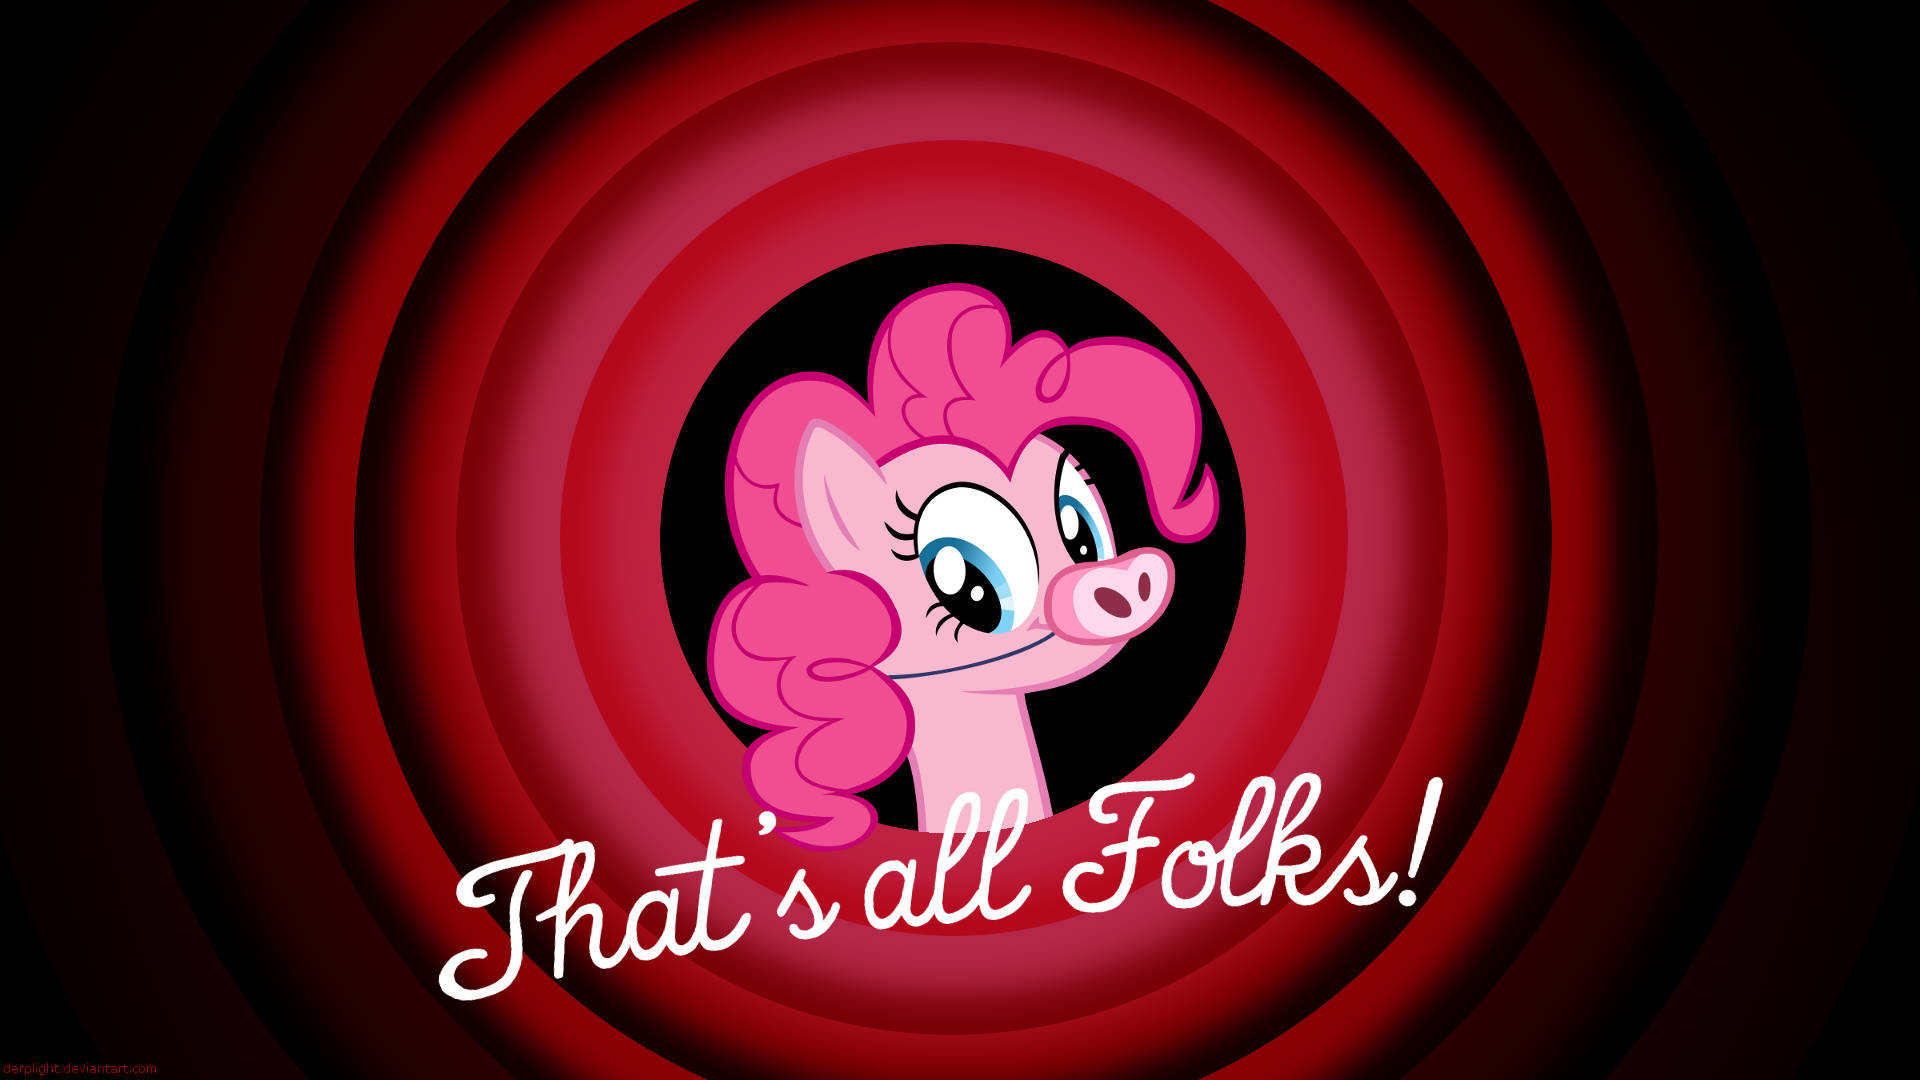 Pinkiepie Det Är Allt, Vänner. (assuming The Speaker Is Referring To A Wallpaper With Pinkie Pie And Wants To Convey The Message 